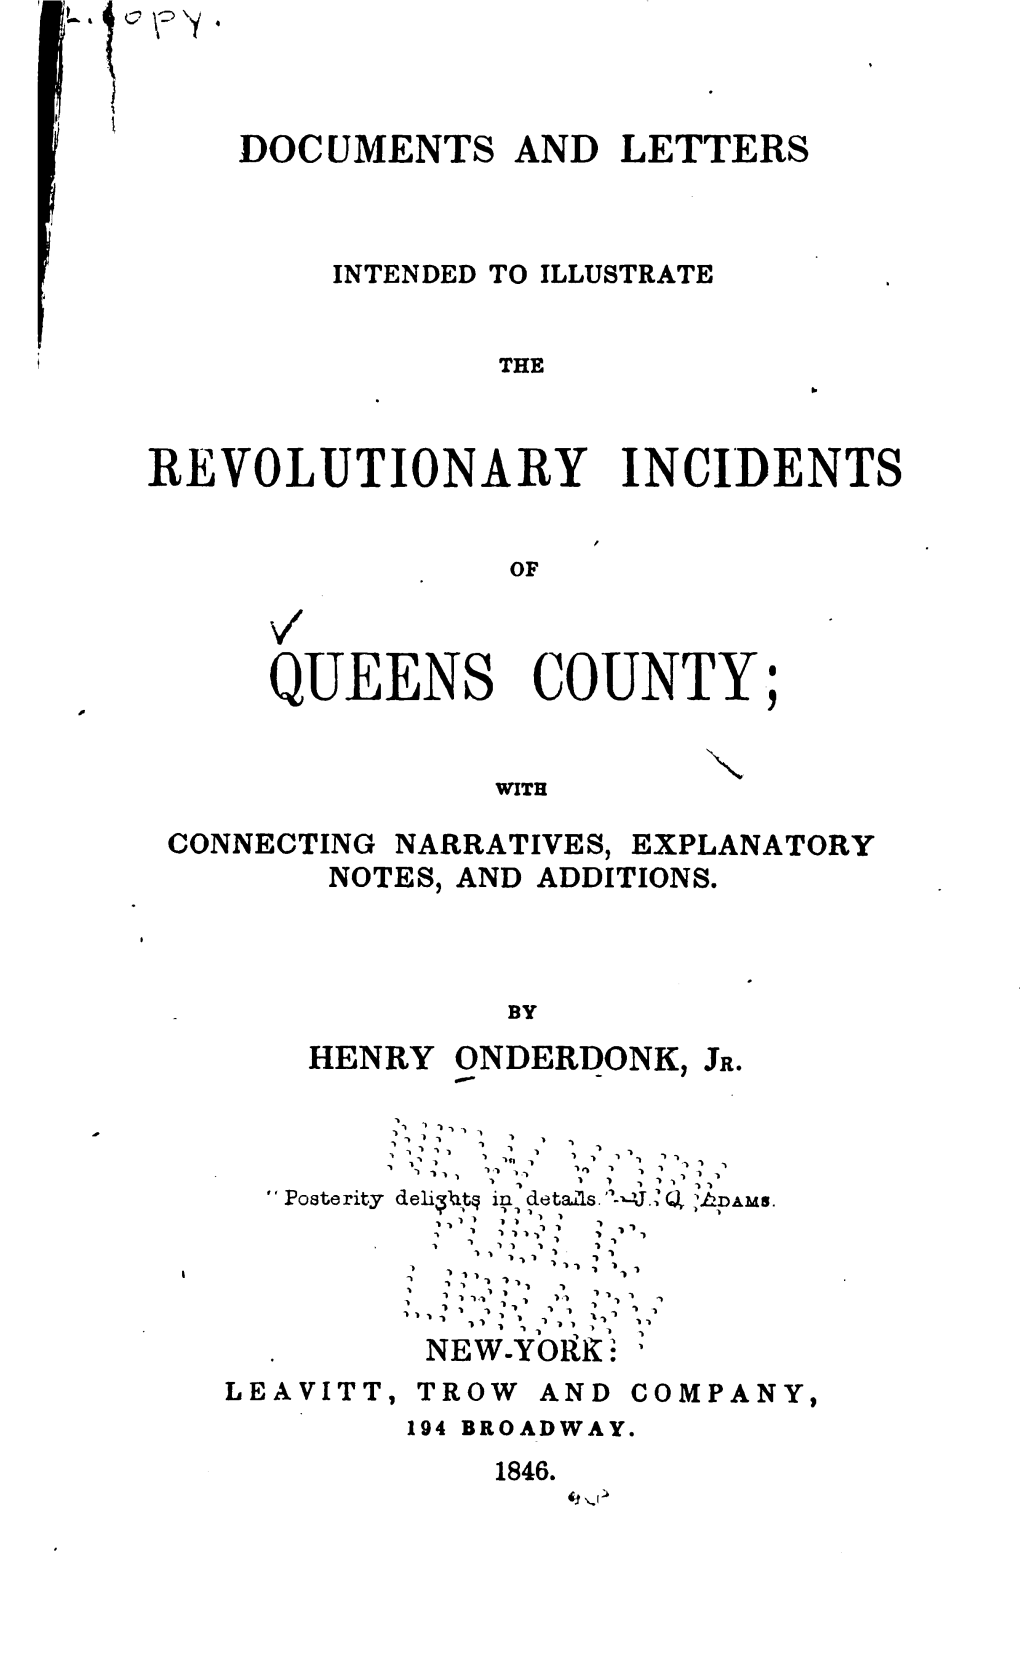 Documents and Letters Intended to Illustrate the Revolutionary